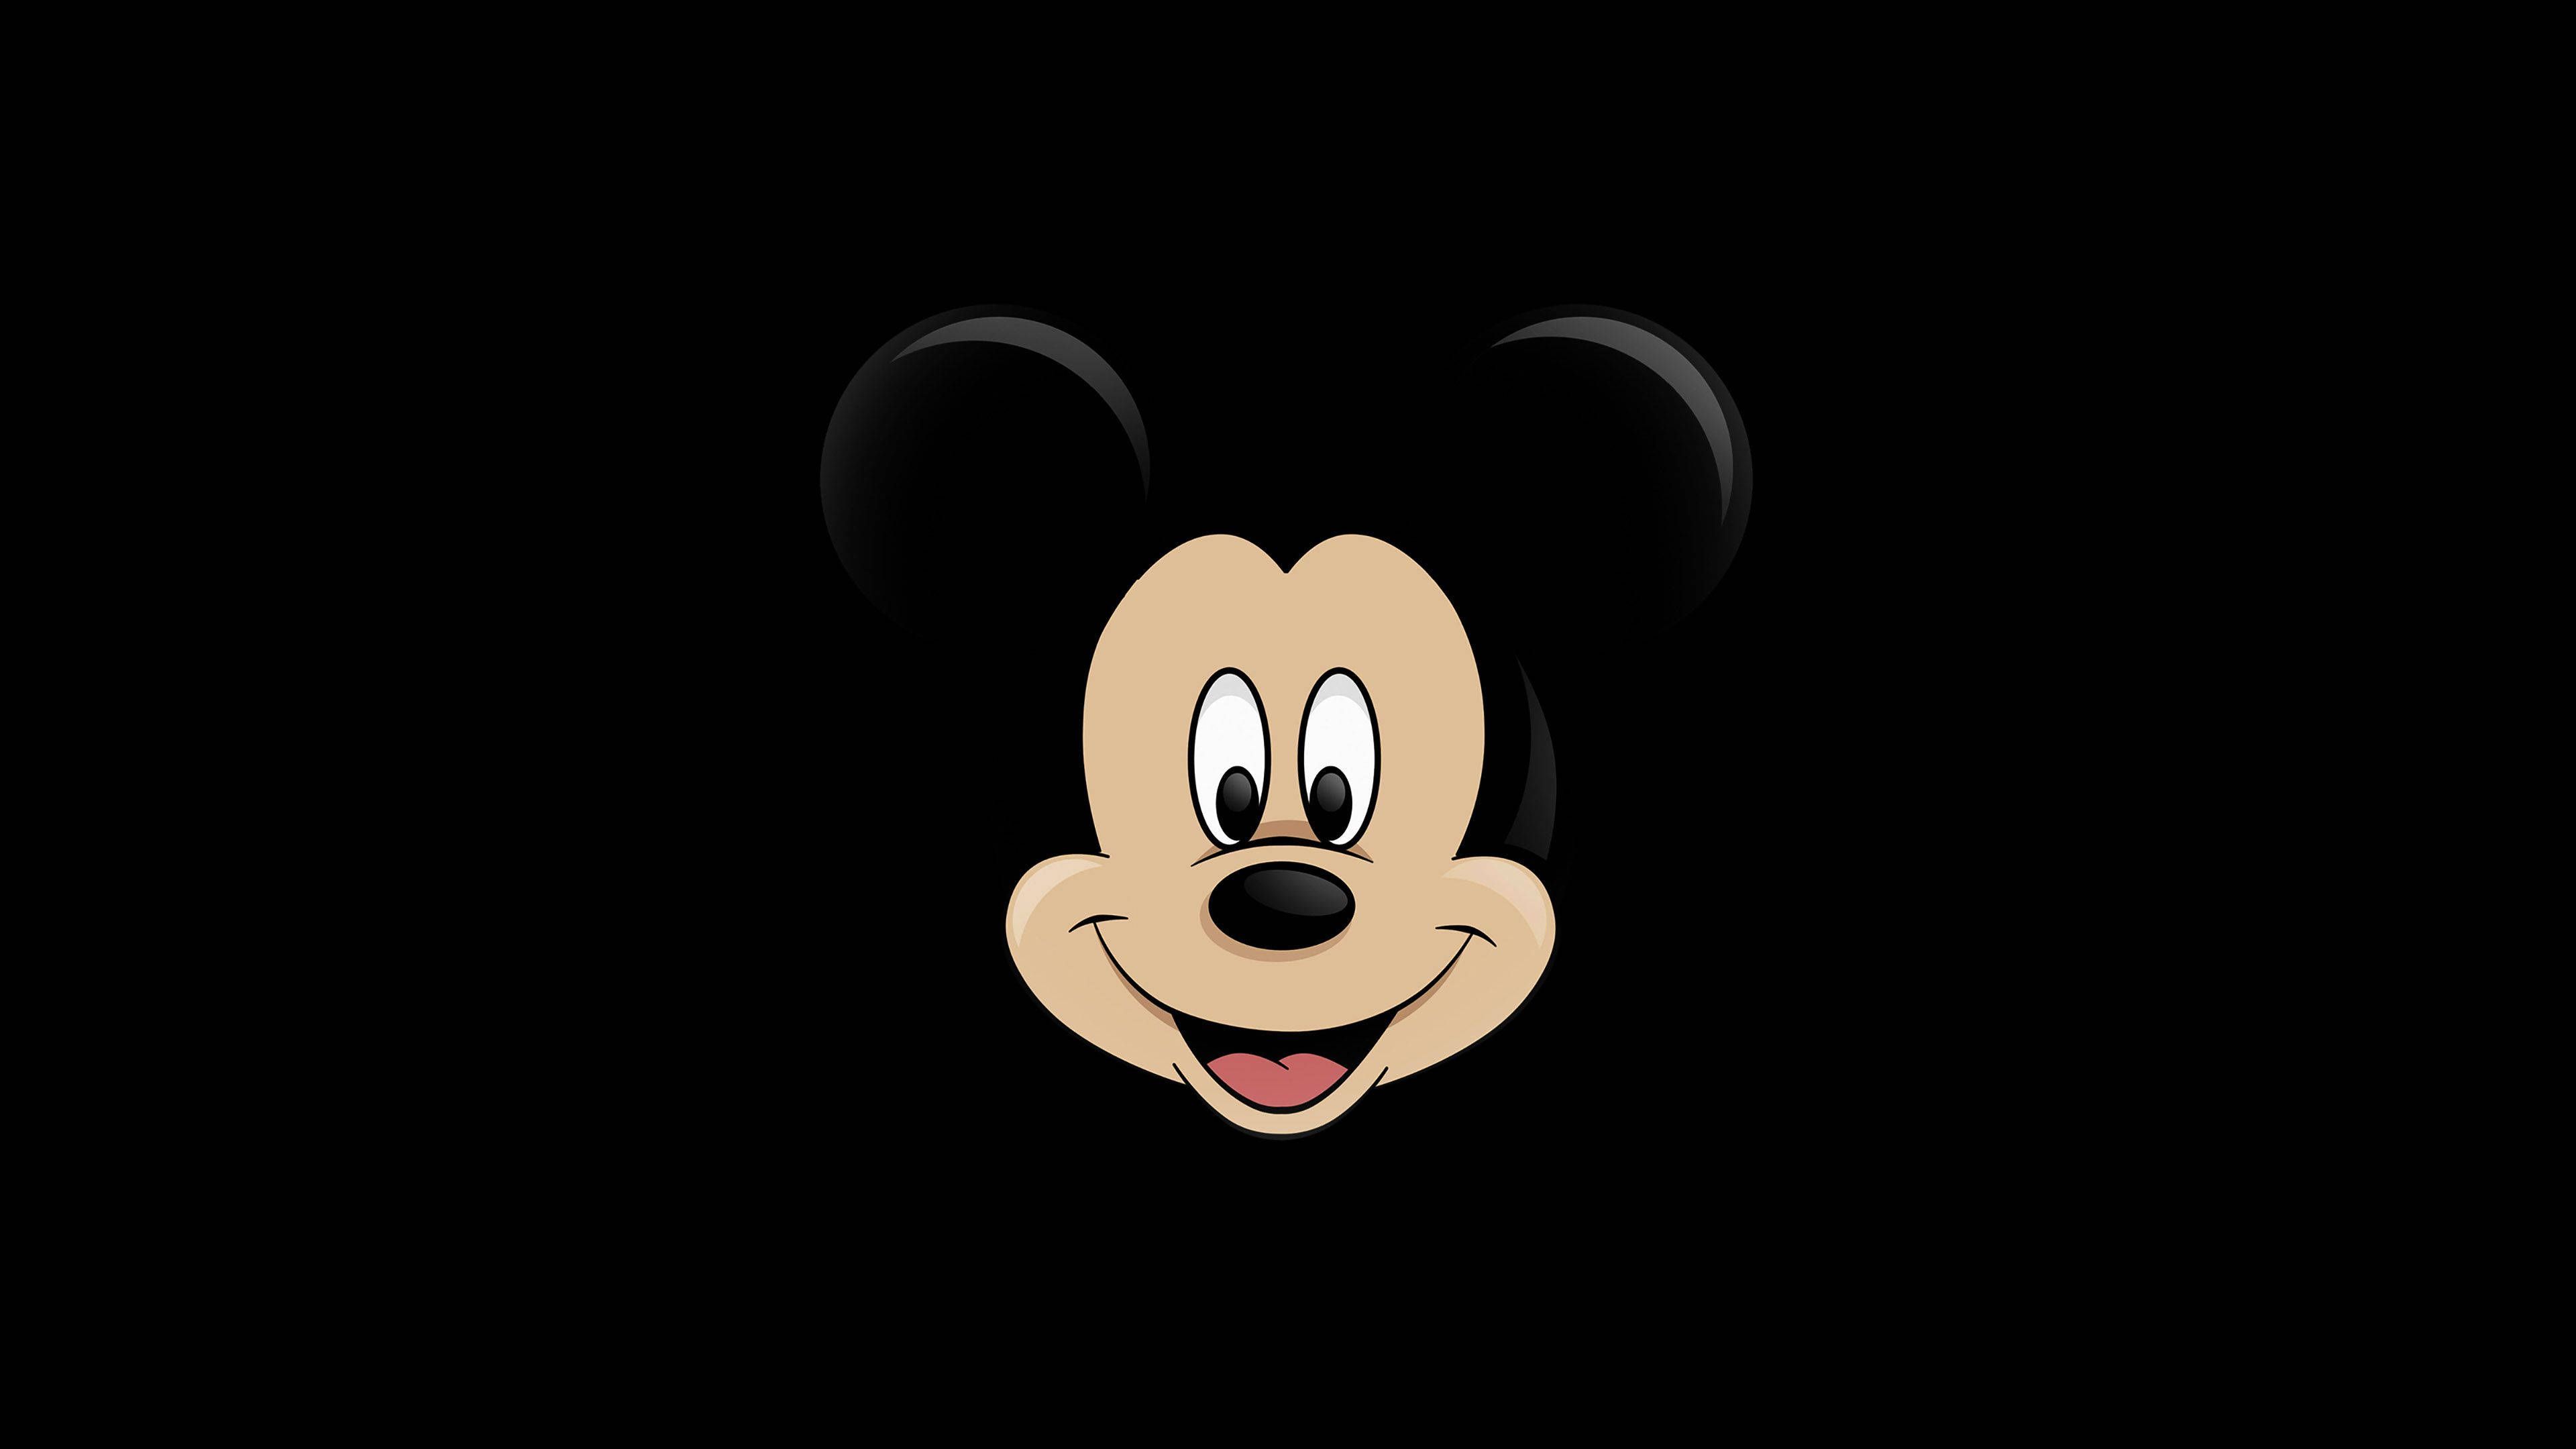 Mickey mouse wallpaper hd 4k - Mickey Mouse